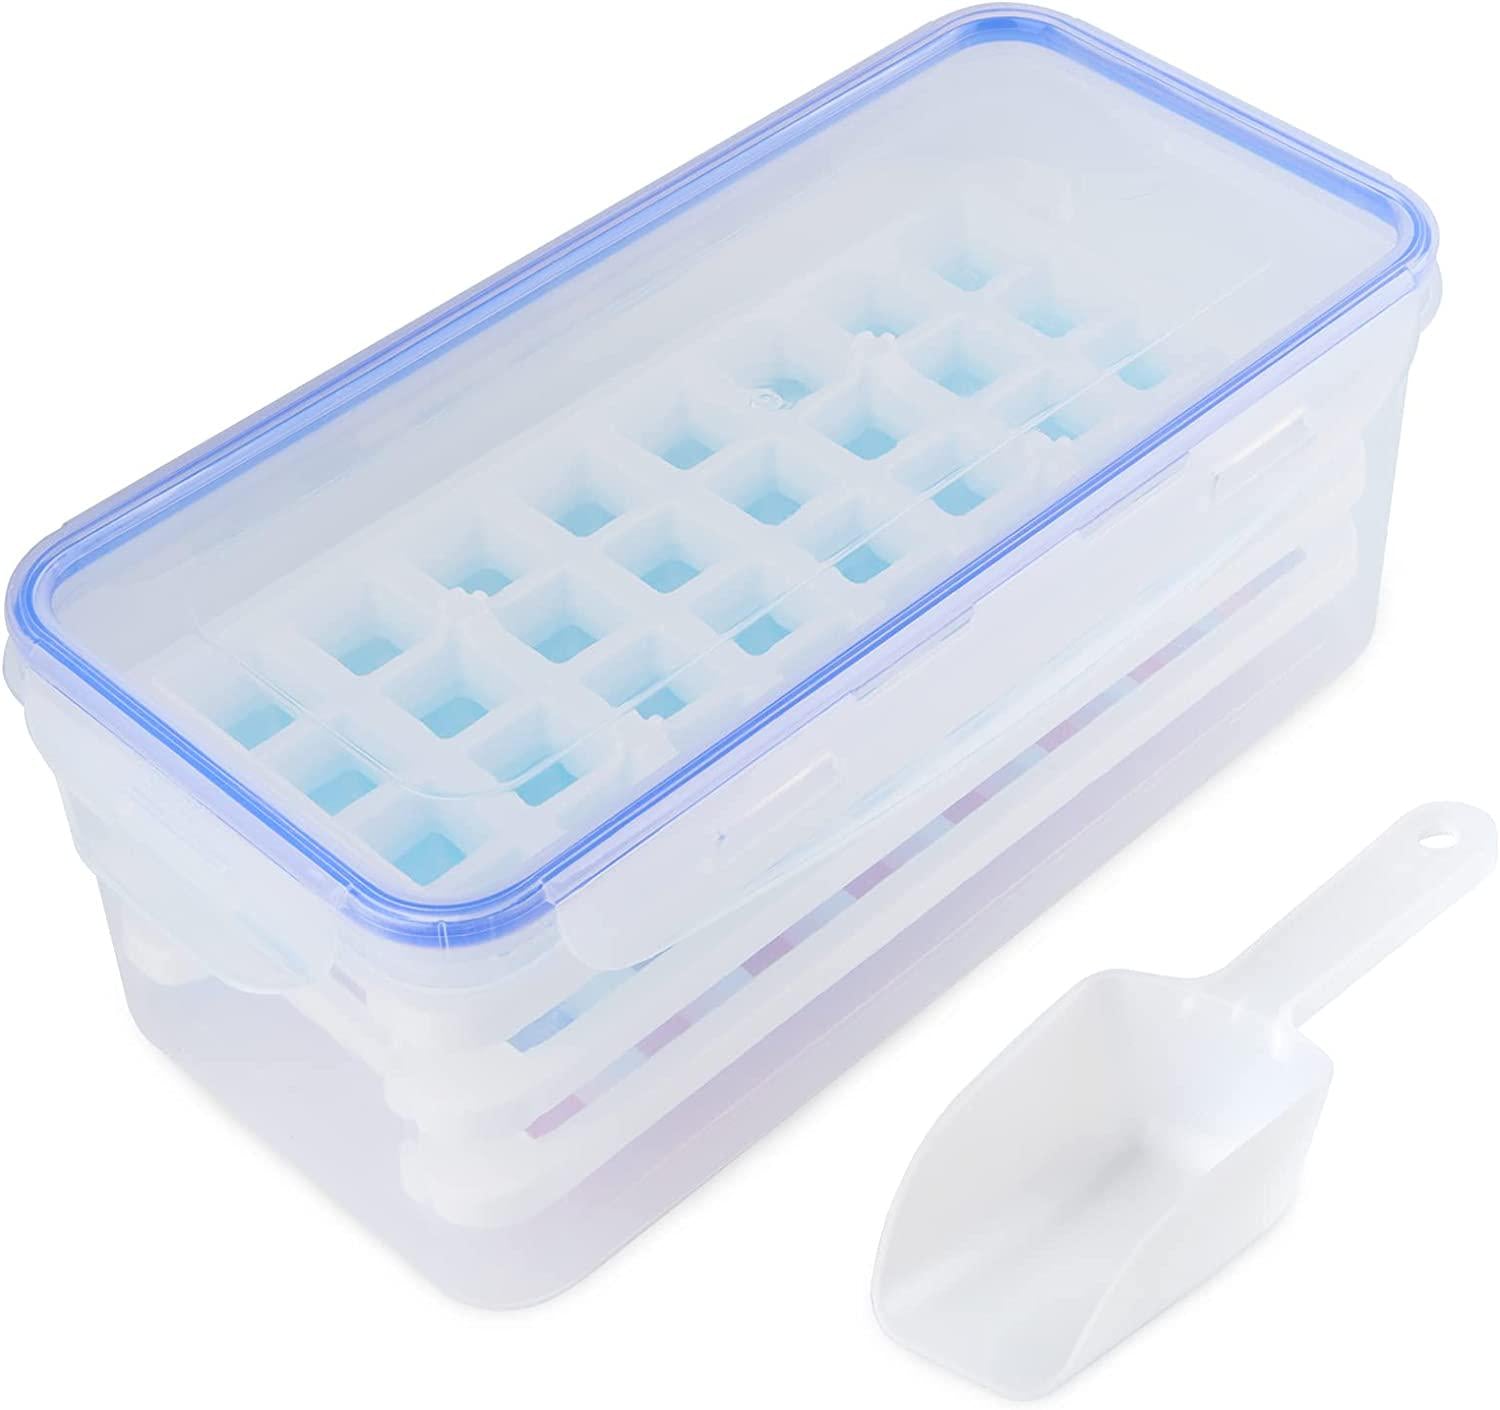 mafiti, mafiti 3 Packs Ice Cube Trays with Ice Shovel,Flexible 32-Ice Trays / 96 Small Ice Cubes with a Big Box with Lid for Save , for Whiskey , Cocktail Drinks Ice-Making for Home Use ,Parties